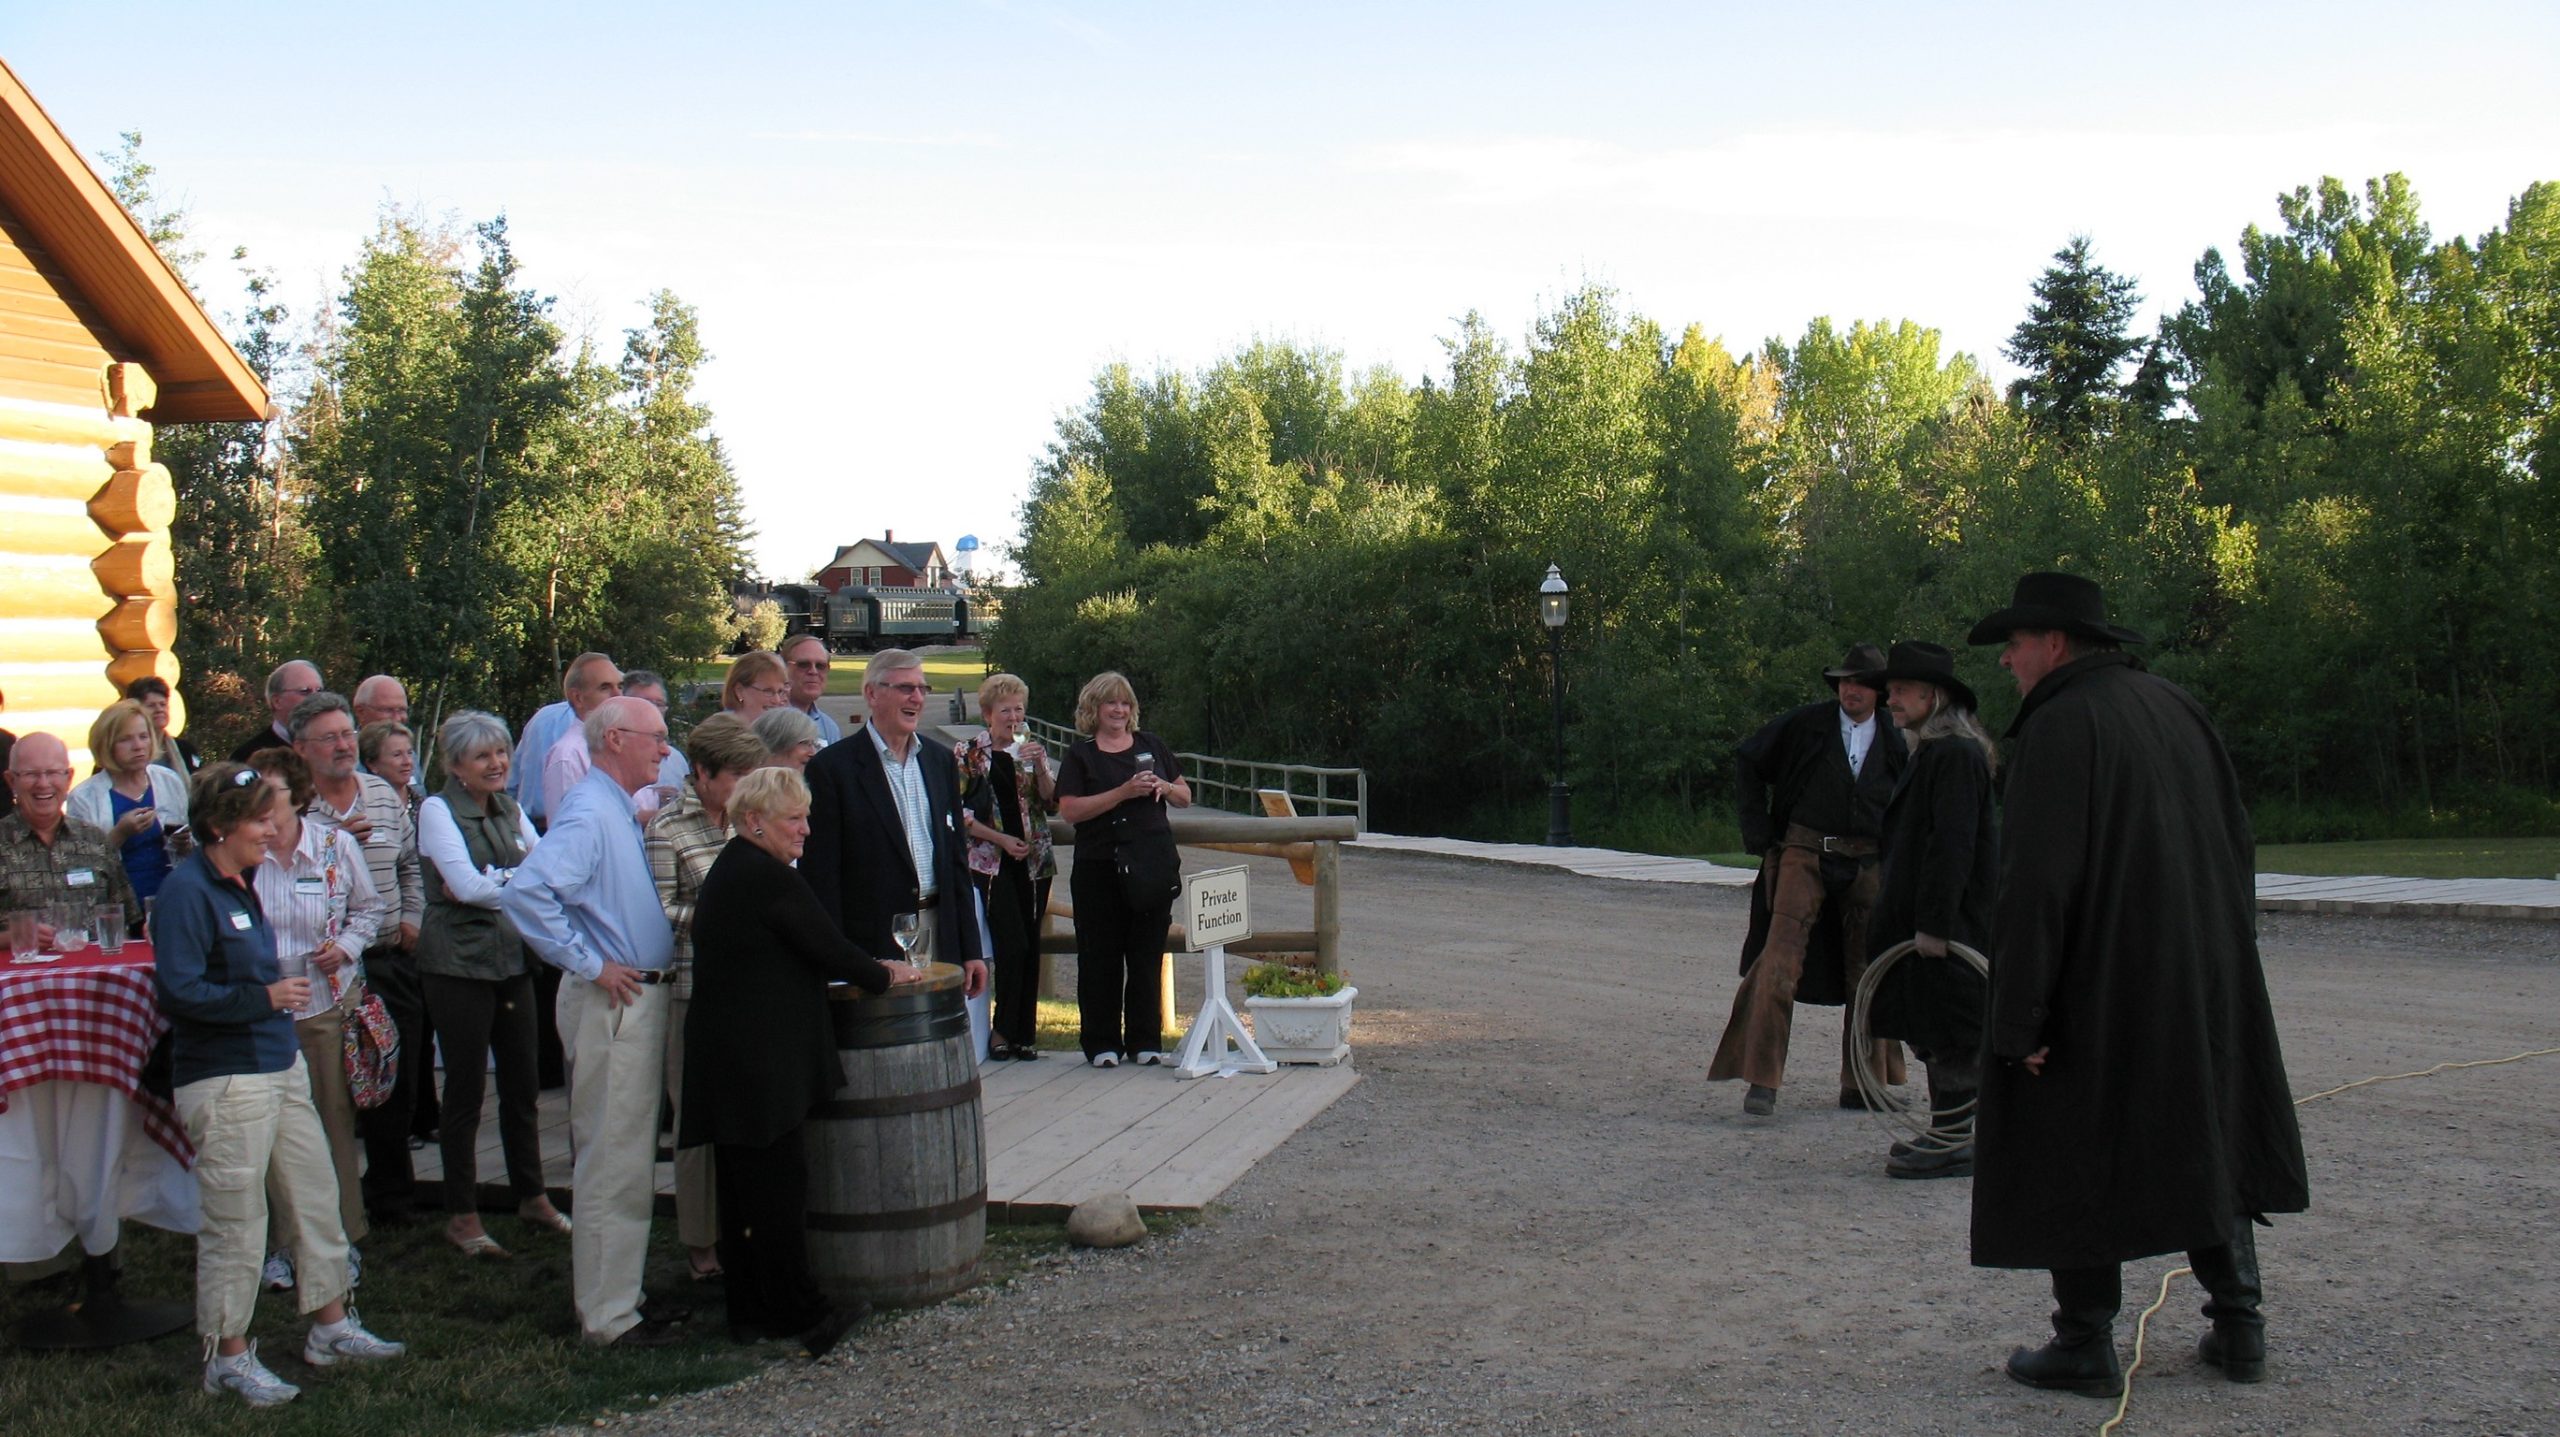 Gunfighters talk with private event goers at Heritage Park